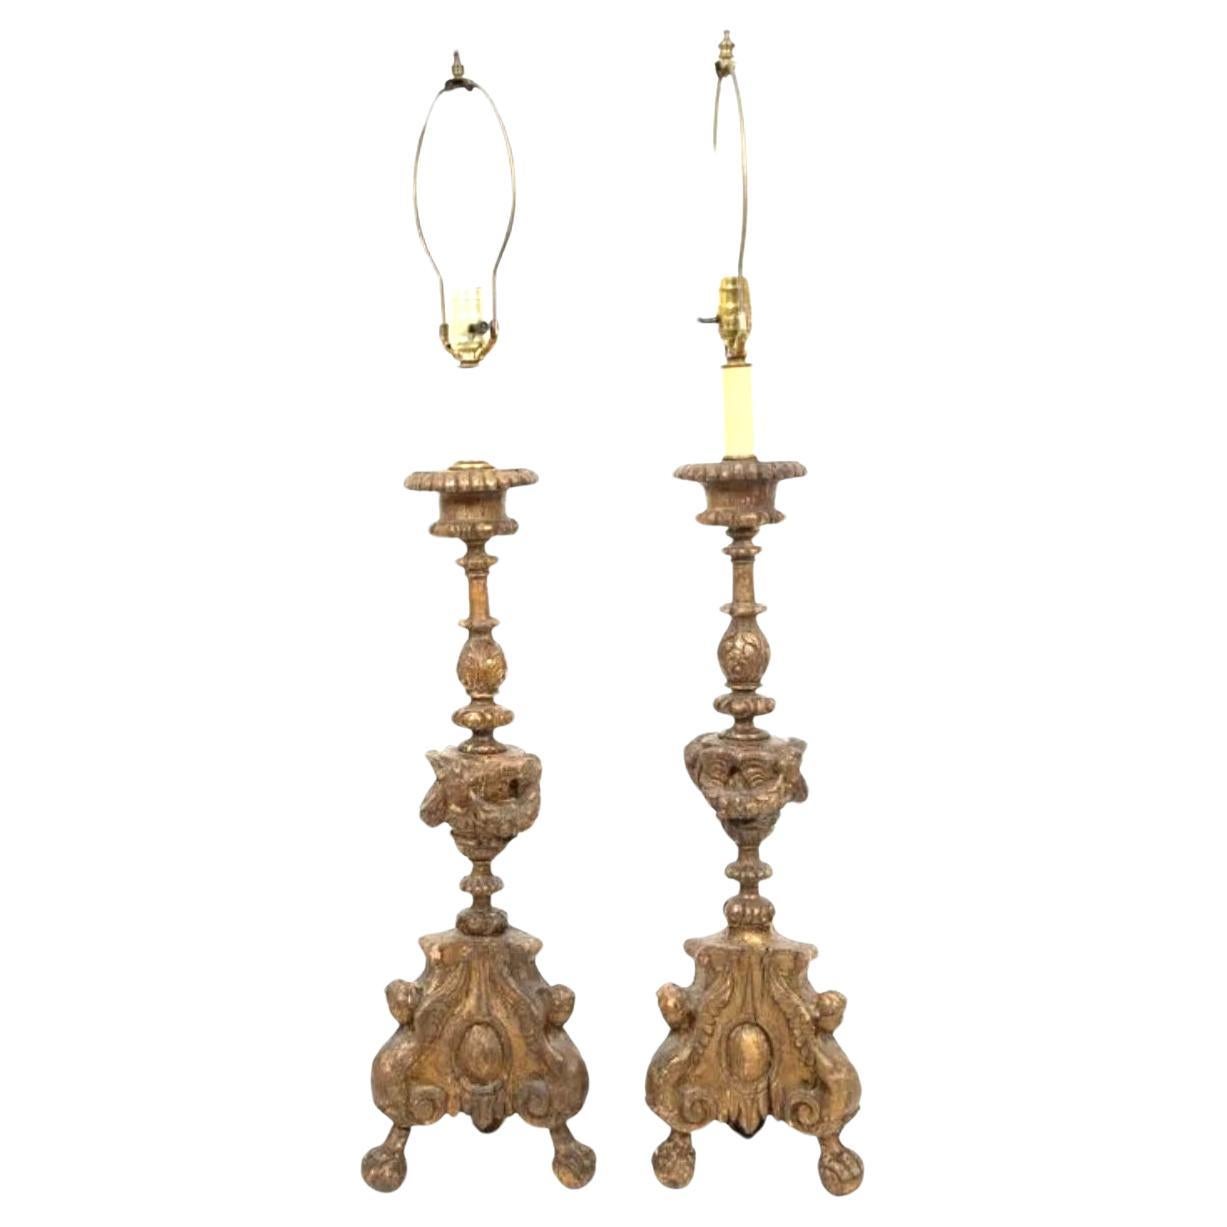 Pair of Pricket Style Giltwood Table Lamps For Sale